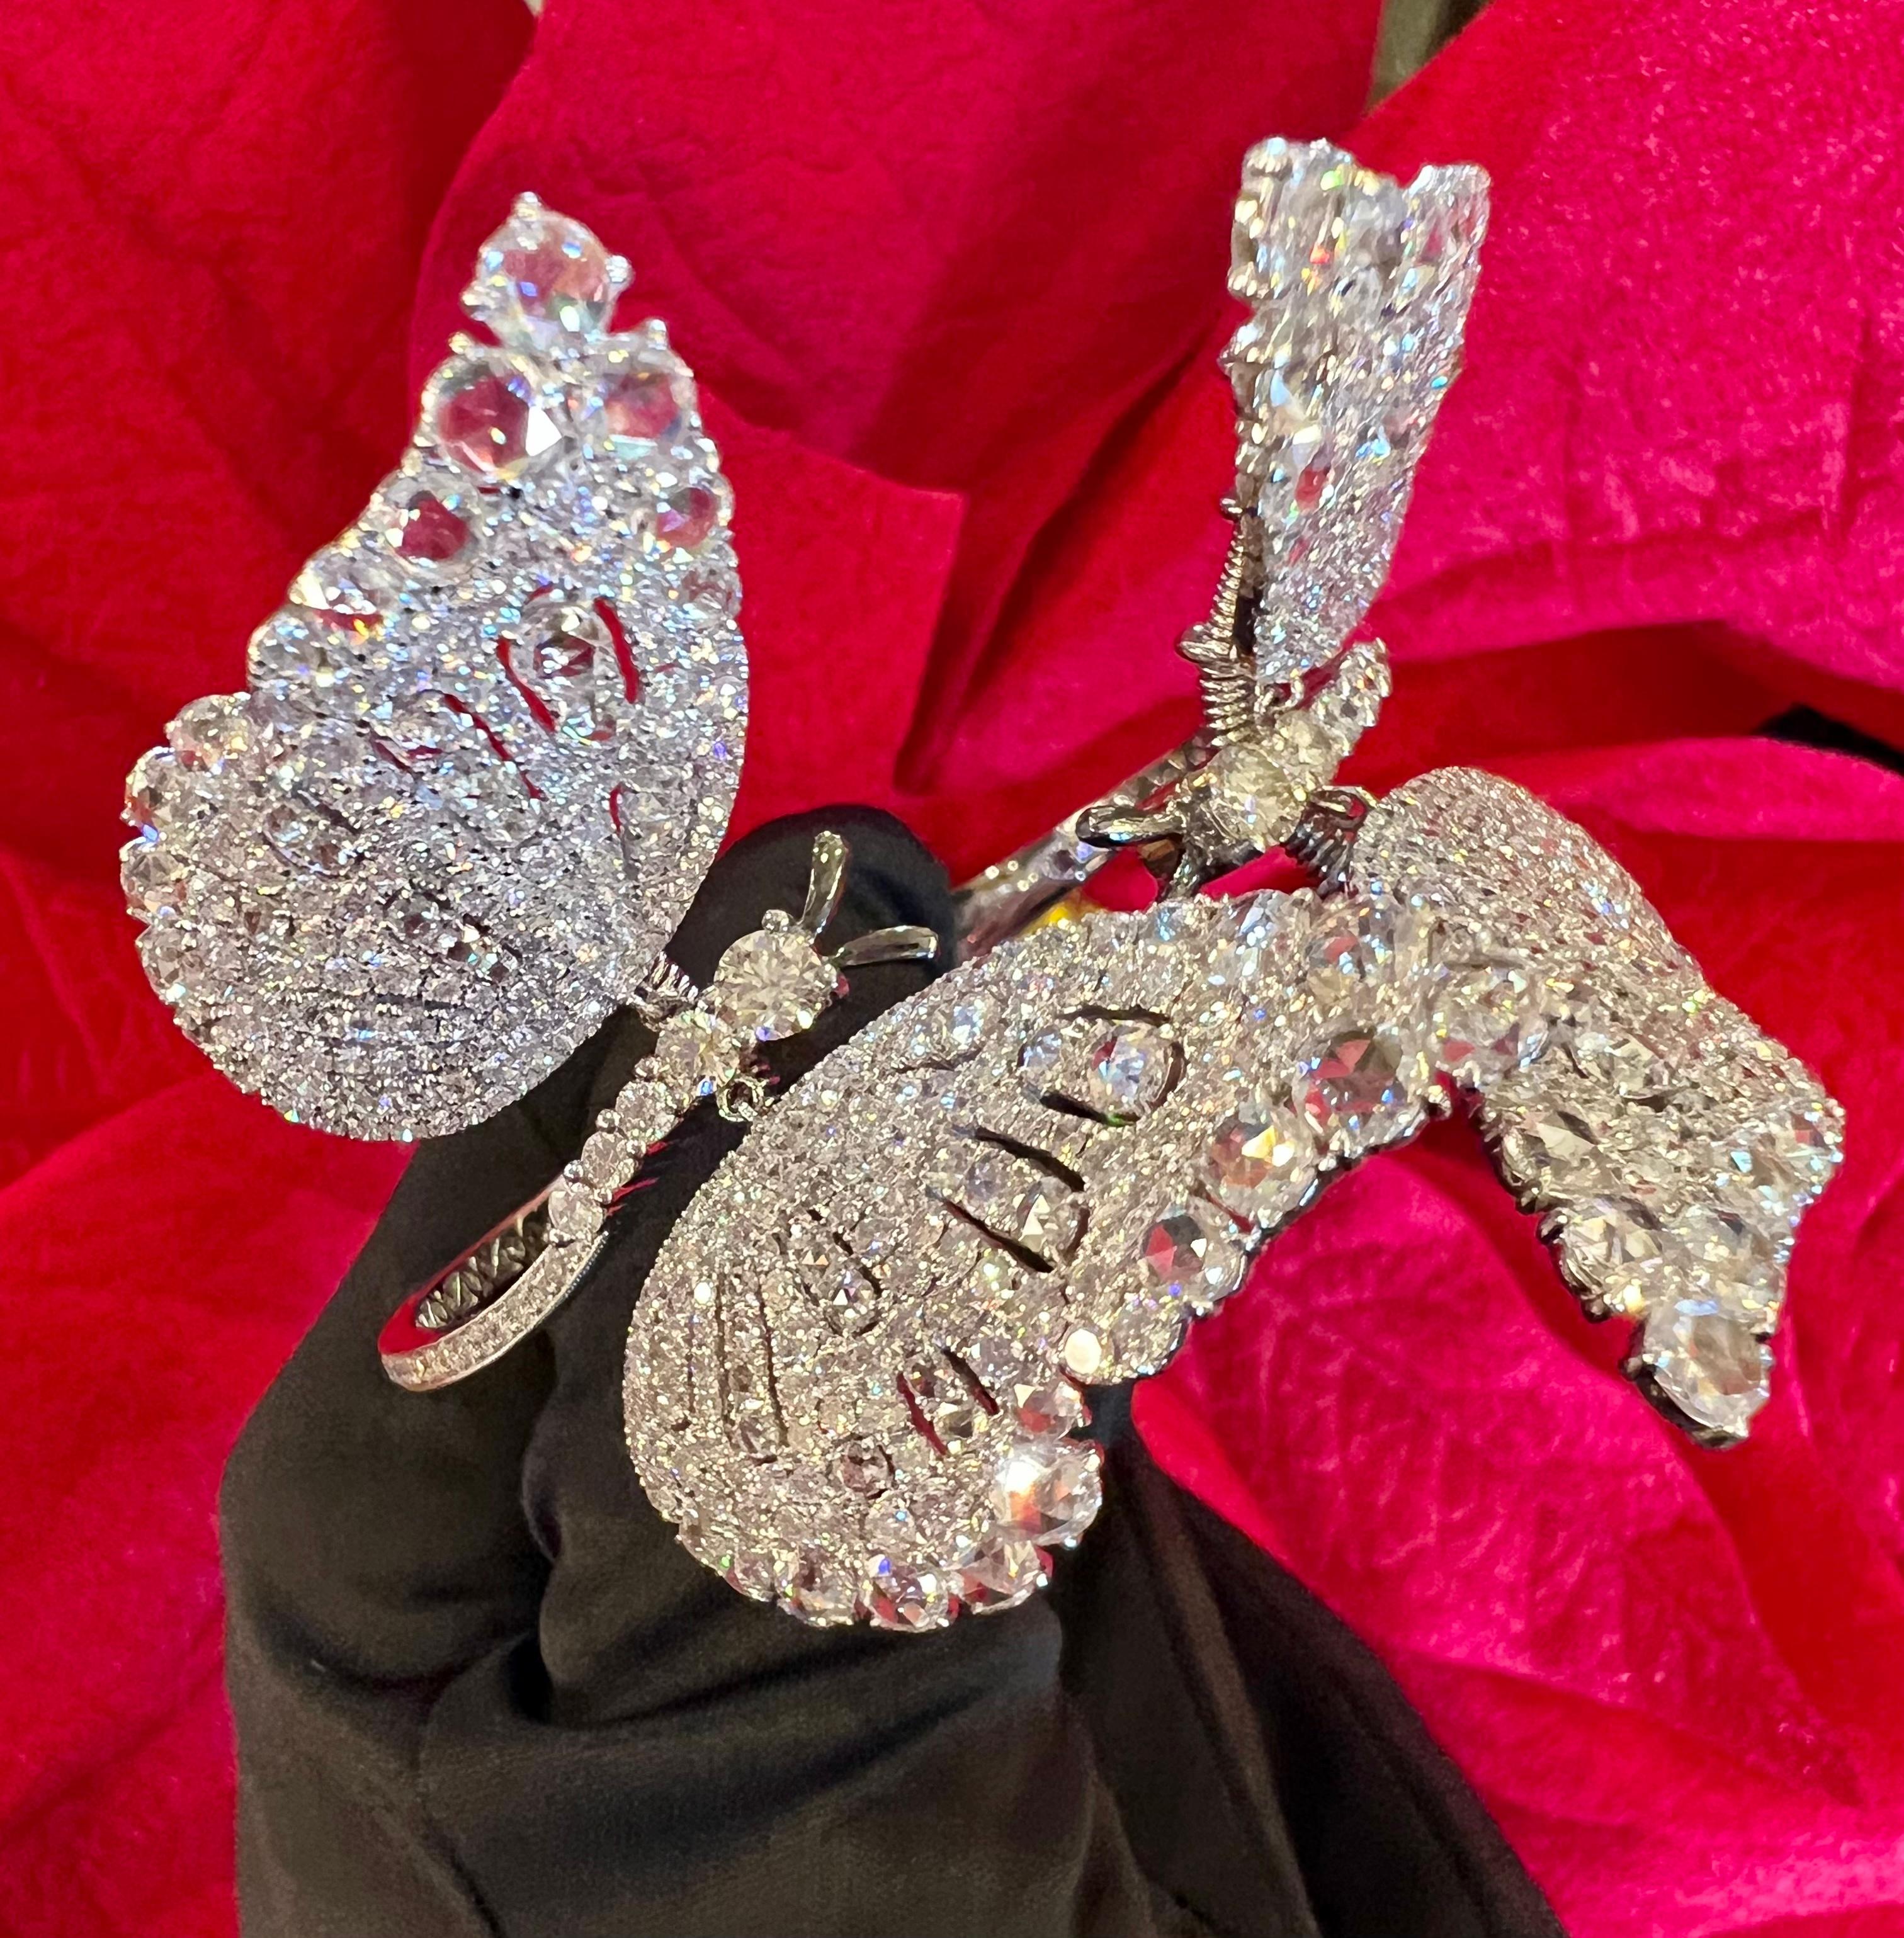 Totally dreamy, hand made, 18 karat white gold hinged diamond butterfly bangle or clamper bracelet features a myriad of the most sparkling diamonds and is a true work of art! Large fluttering wings move with grace giving the appearance the